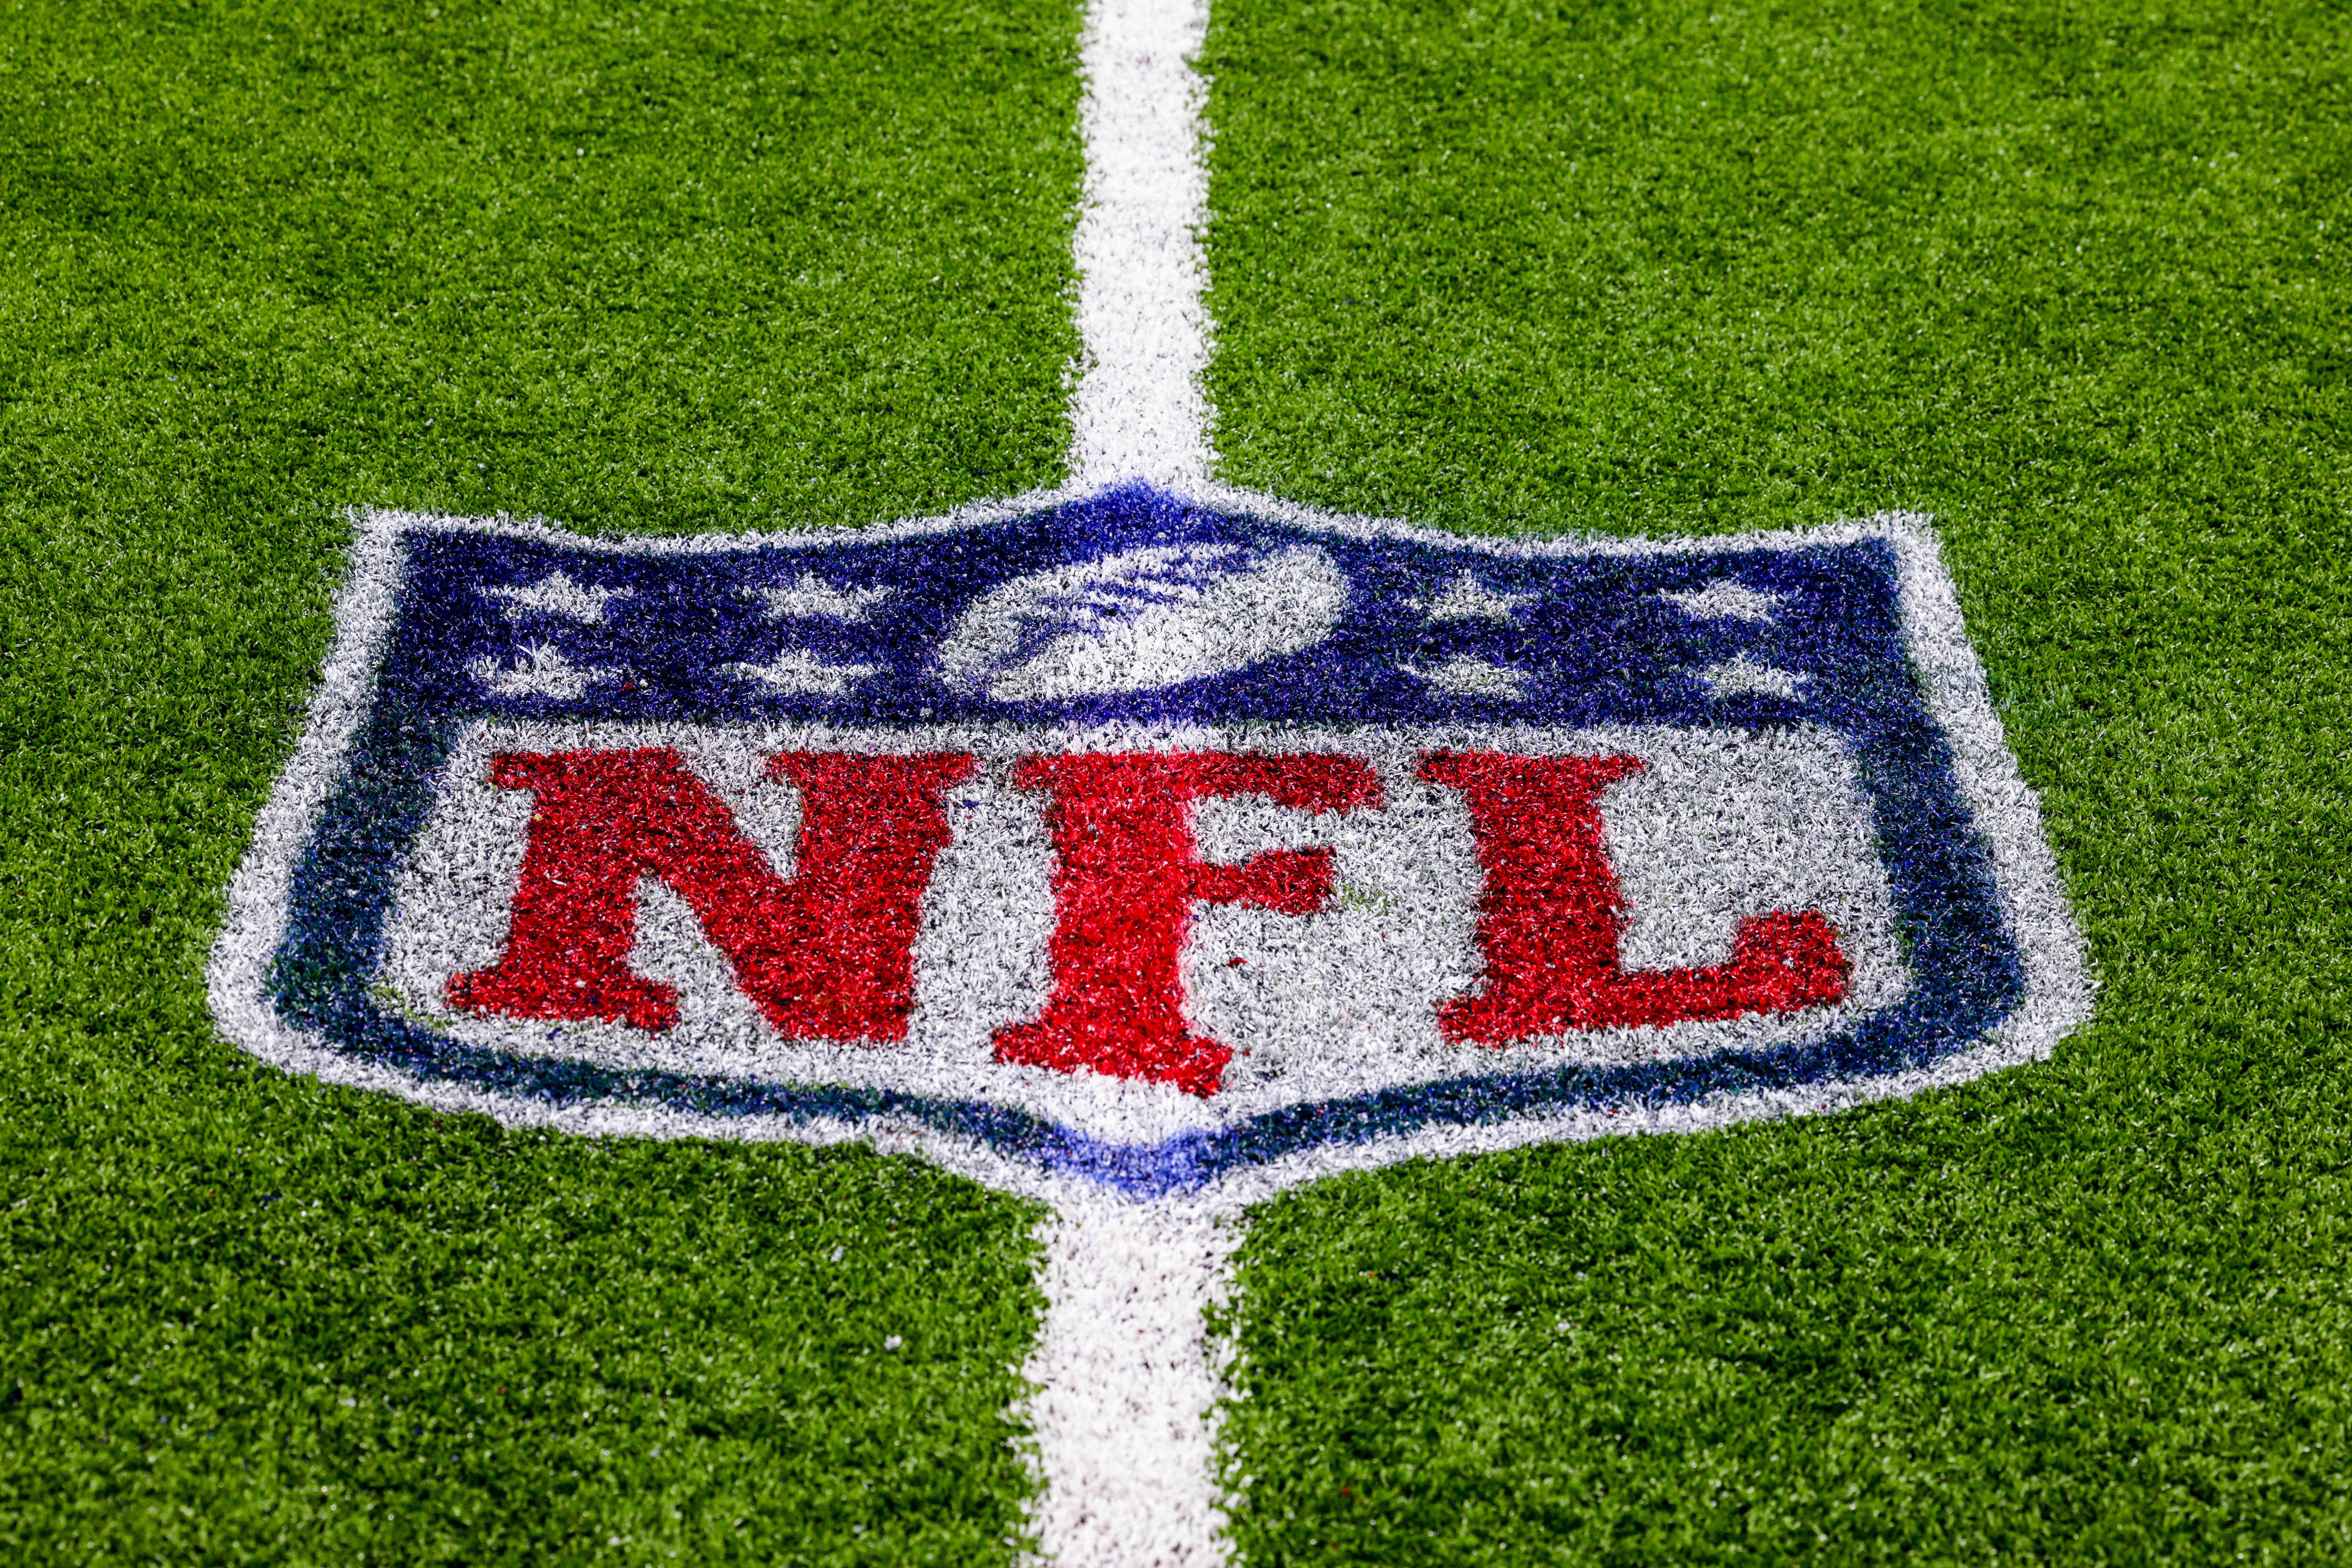 NFL eyes Spain, France and Brazil as sites for future international games